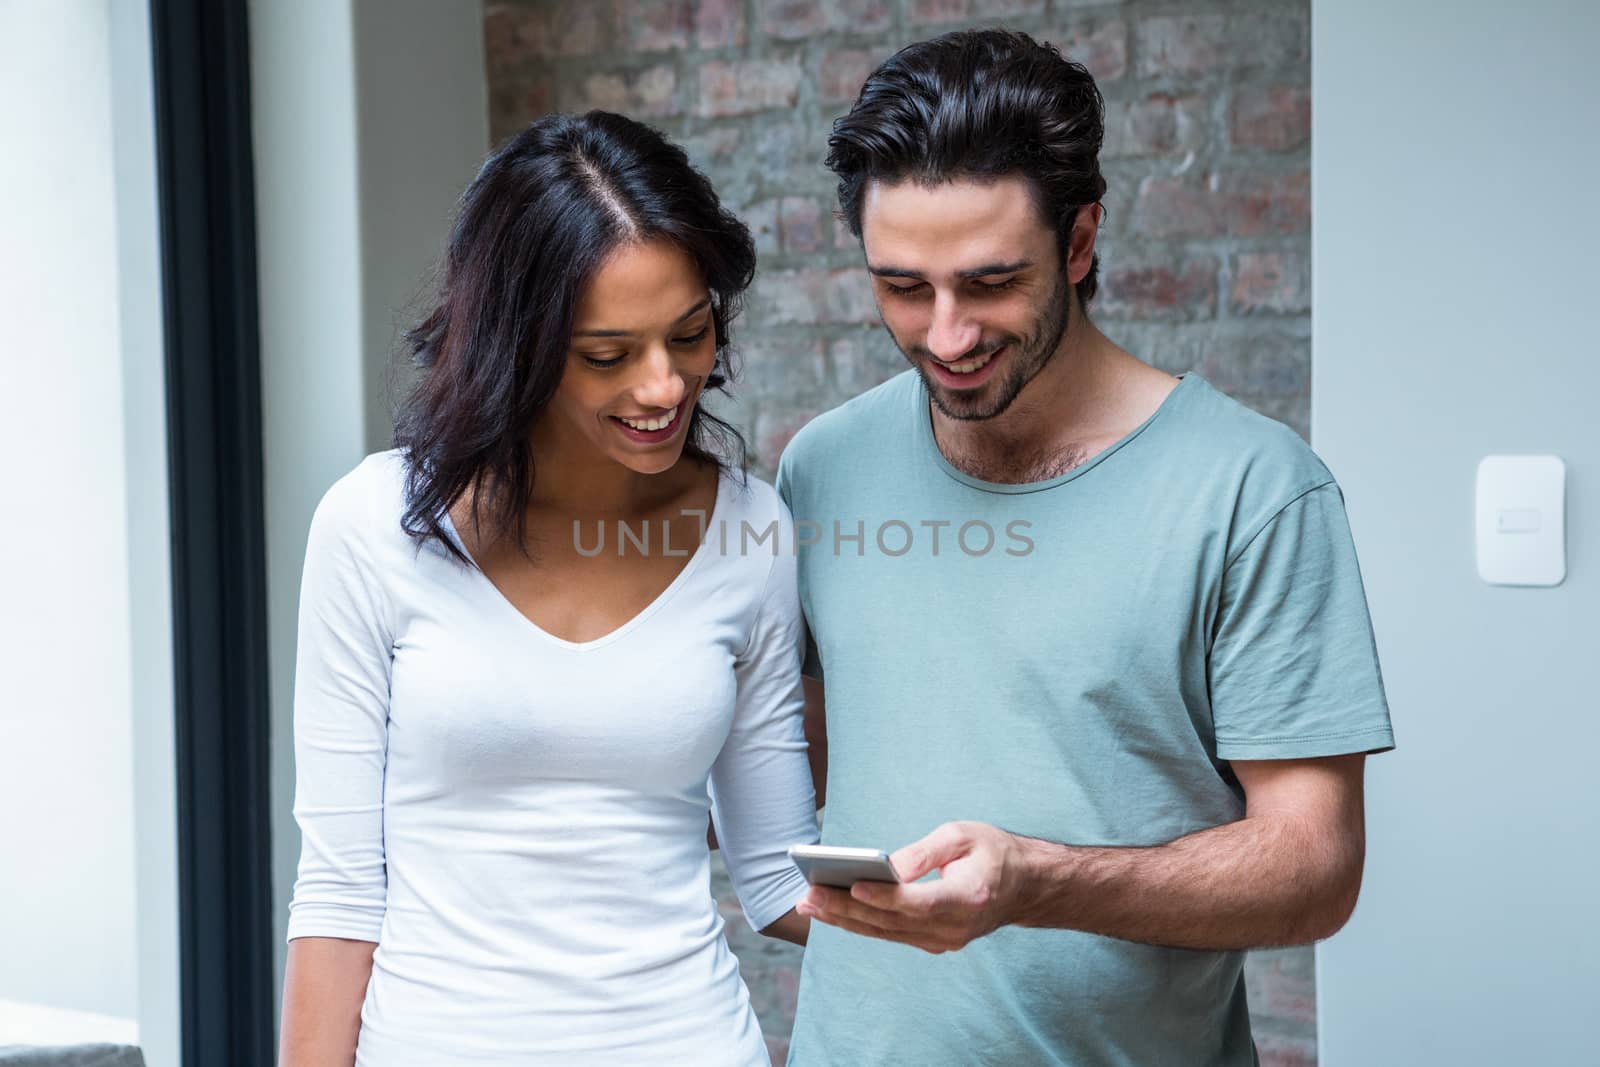 Smiling couple using smartphone together in living room